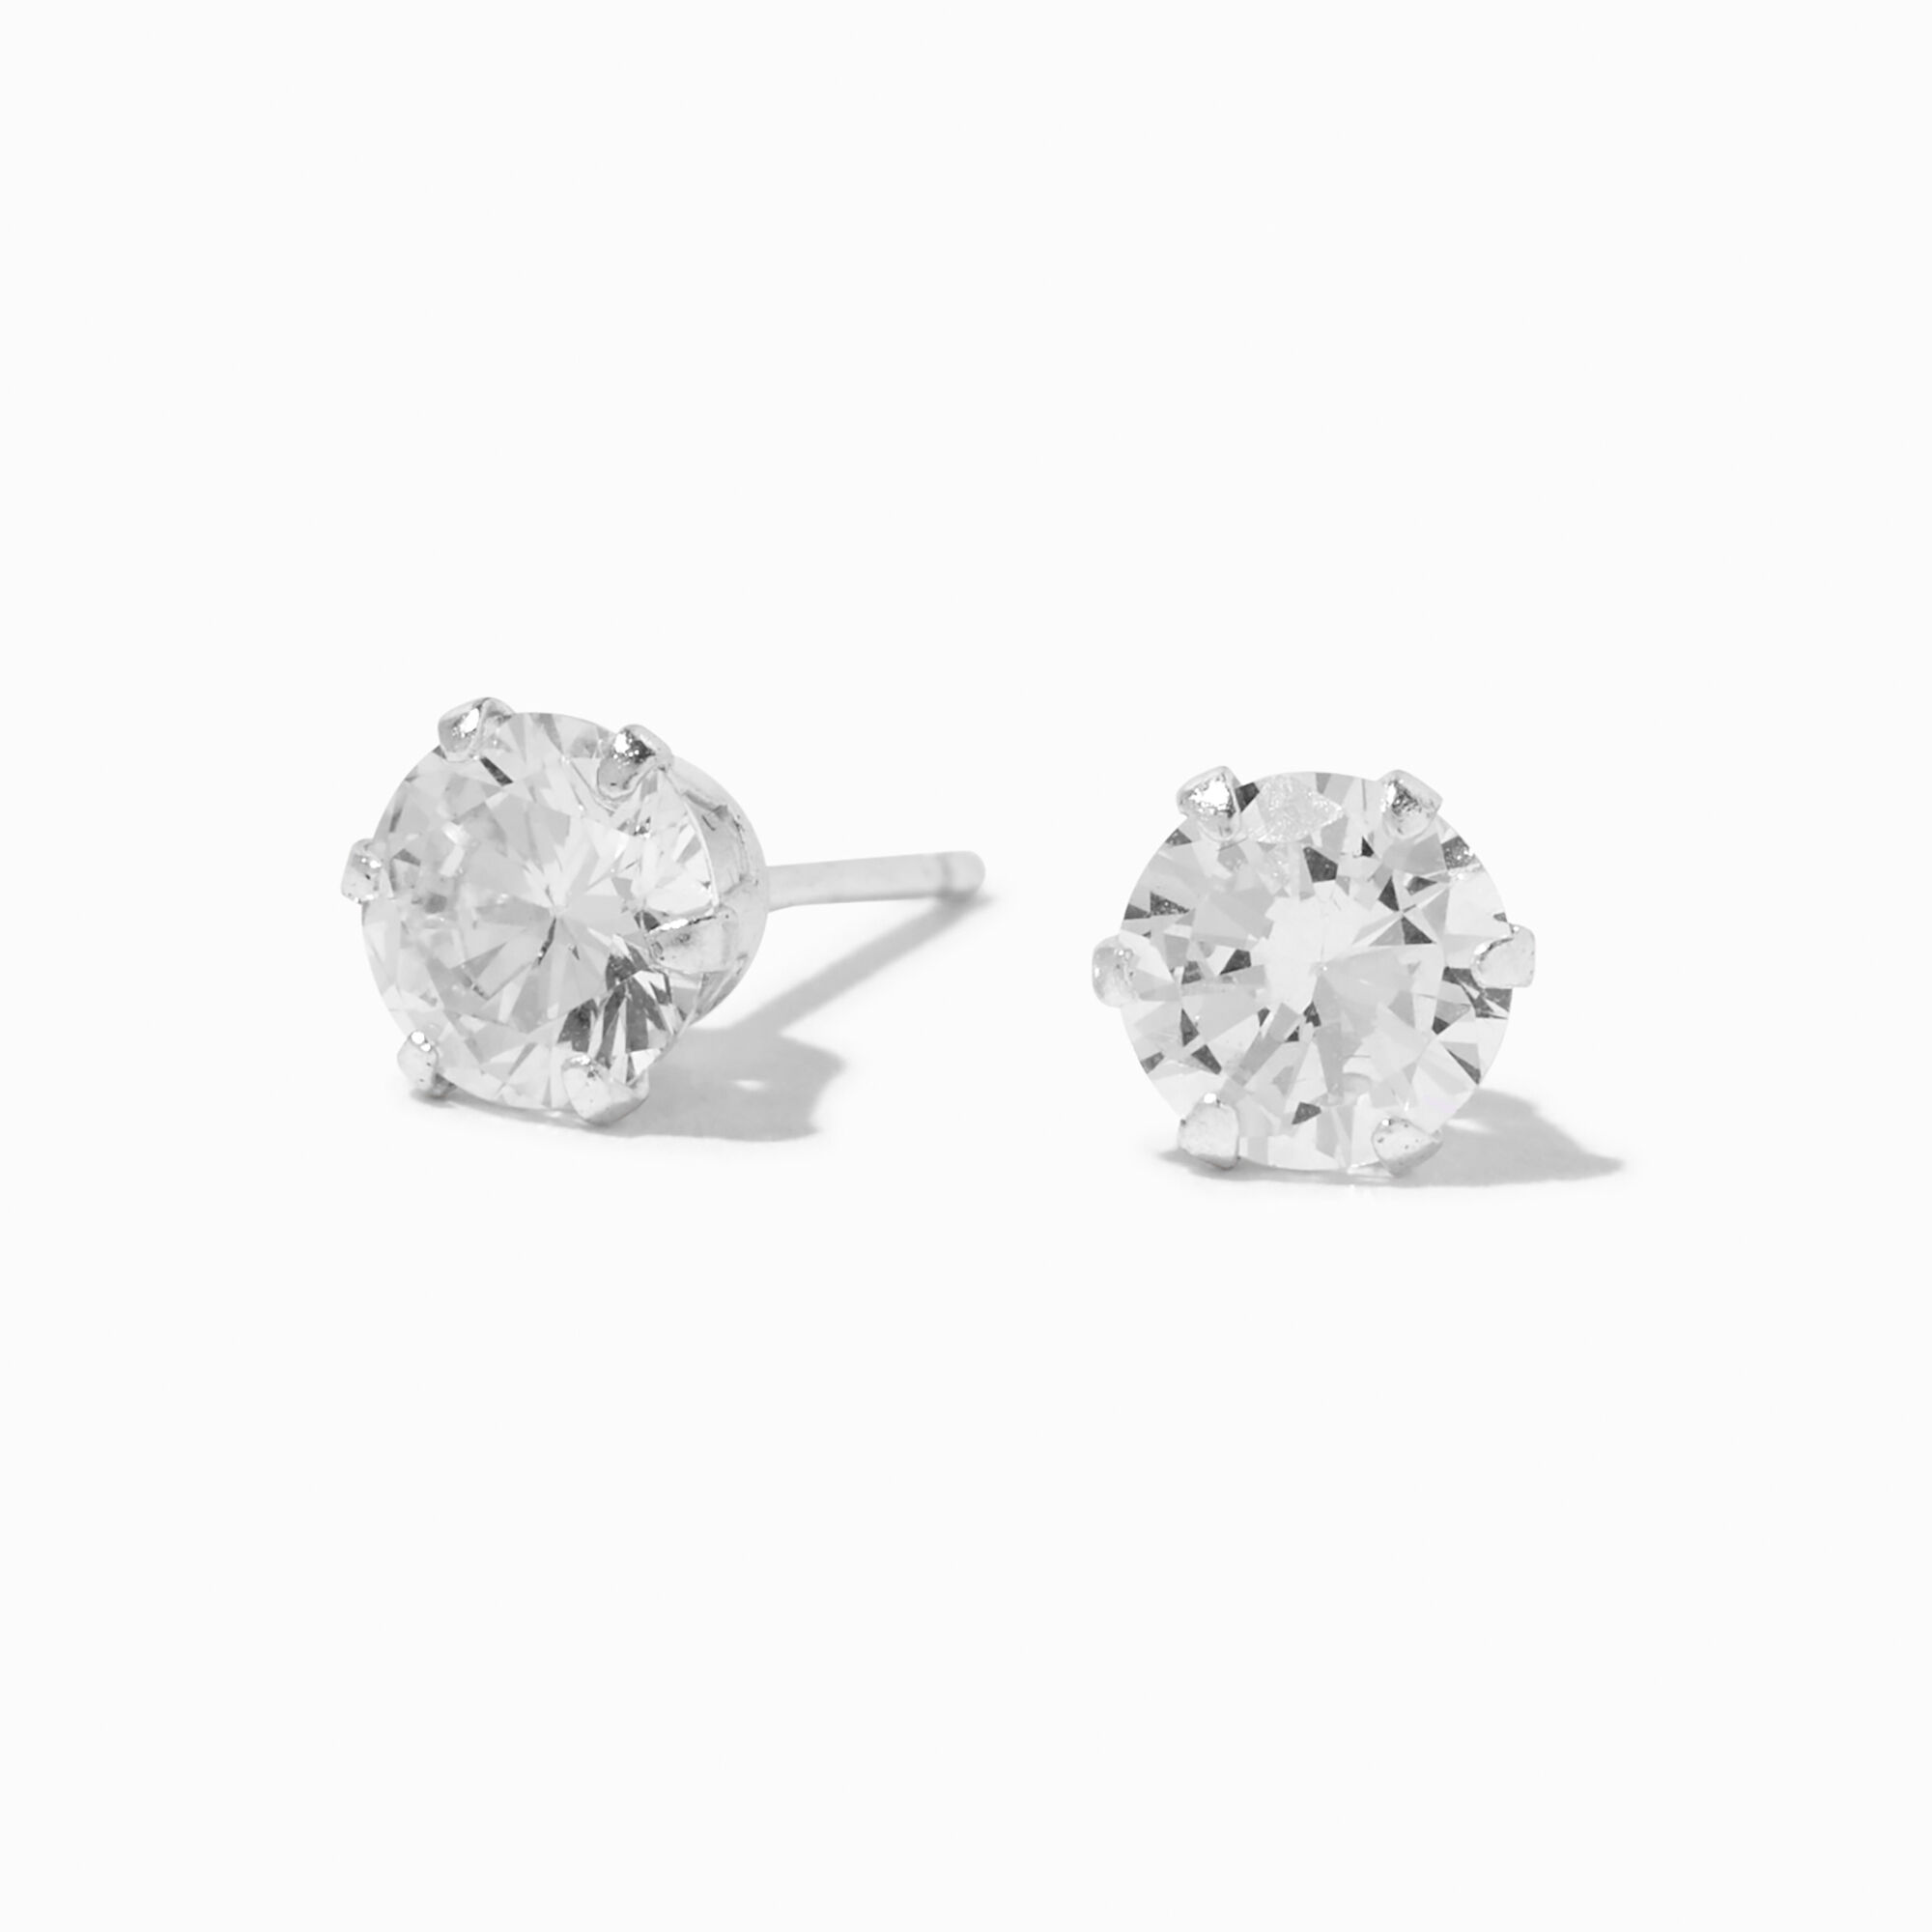 View Claires Cubic Zirconia Round Stud Earrings 6MM Silver information